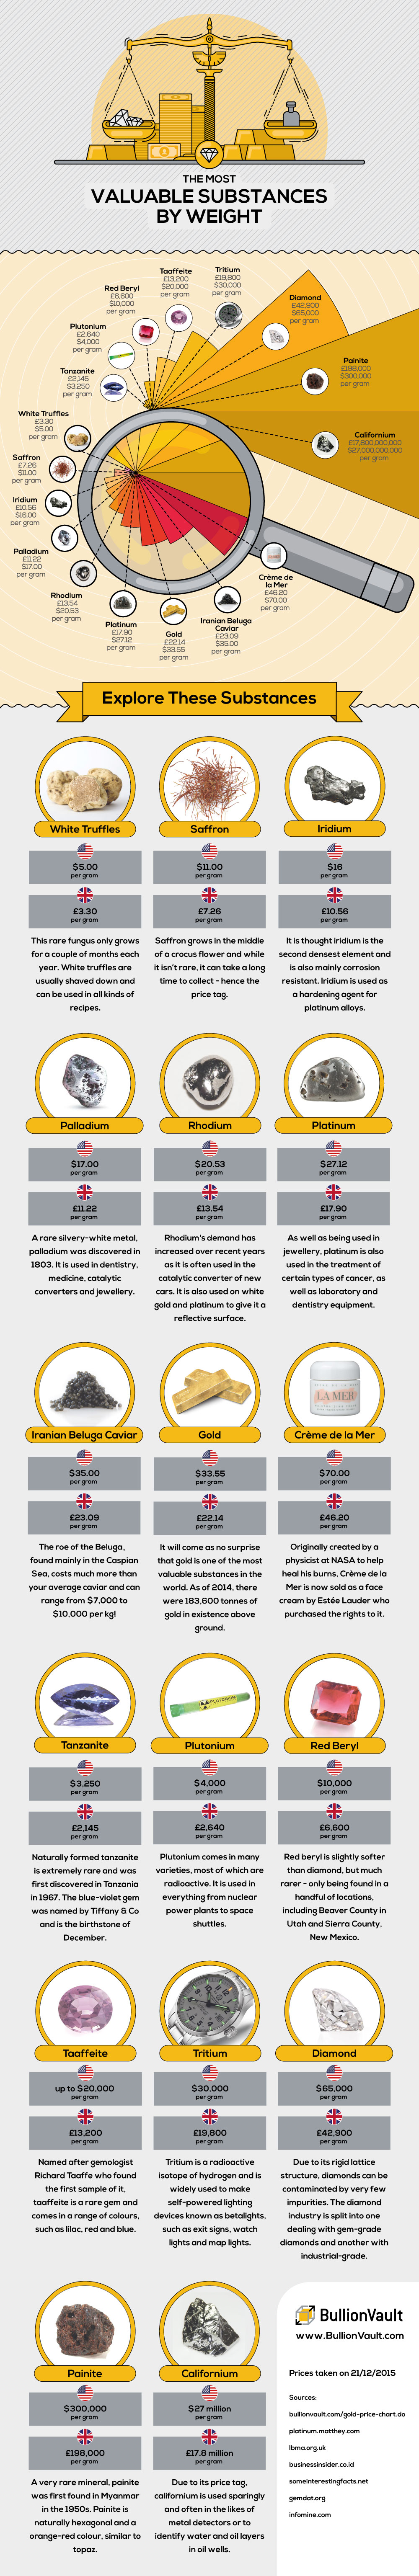 Desolate very Yup Infographic: The World's Most Valuable Substances by Weight